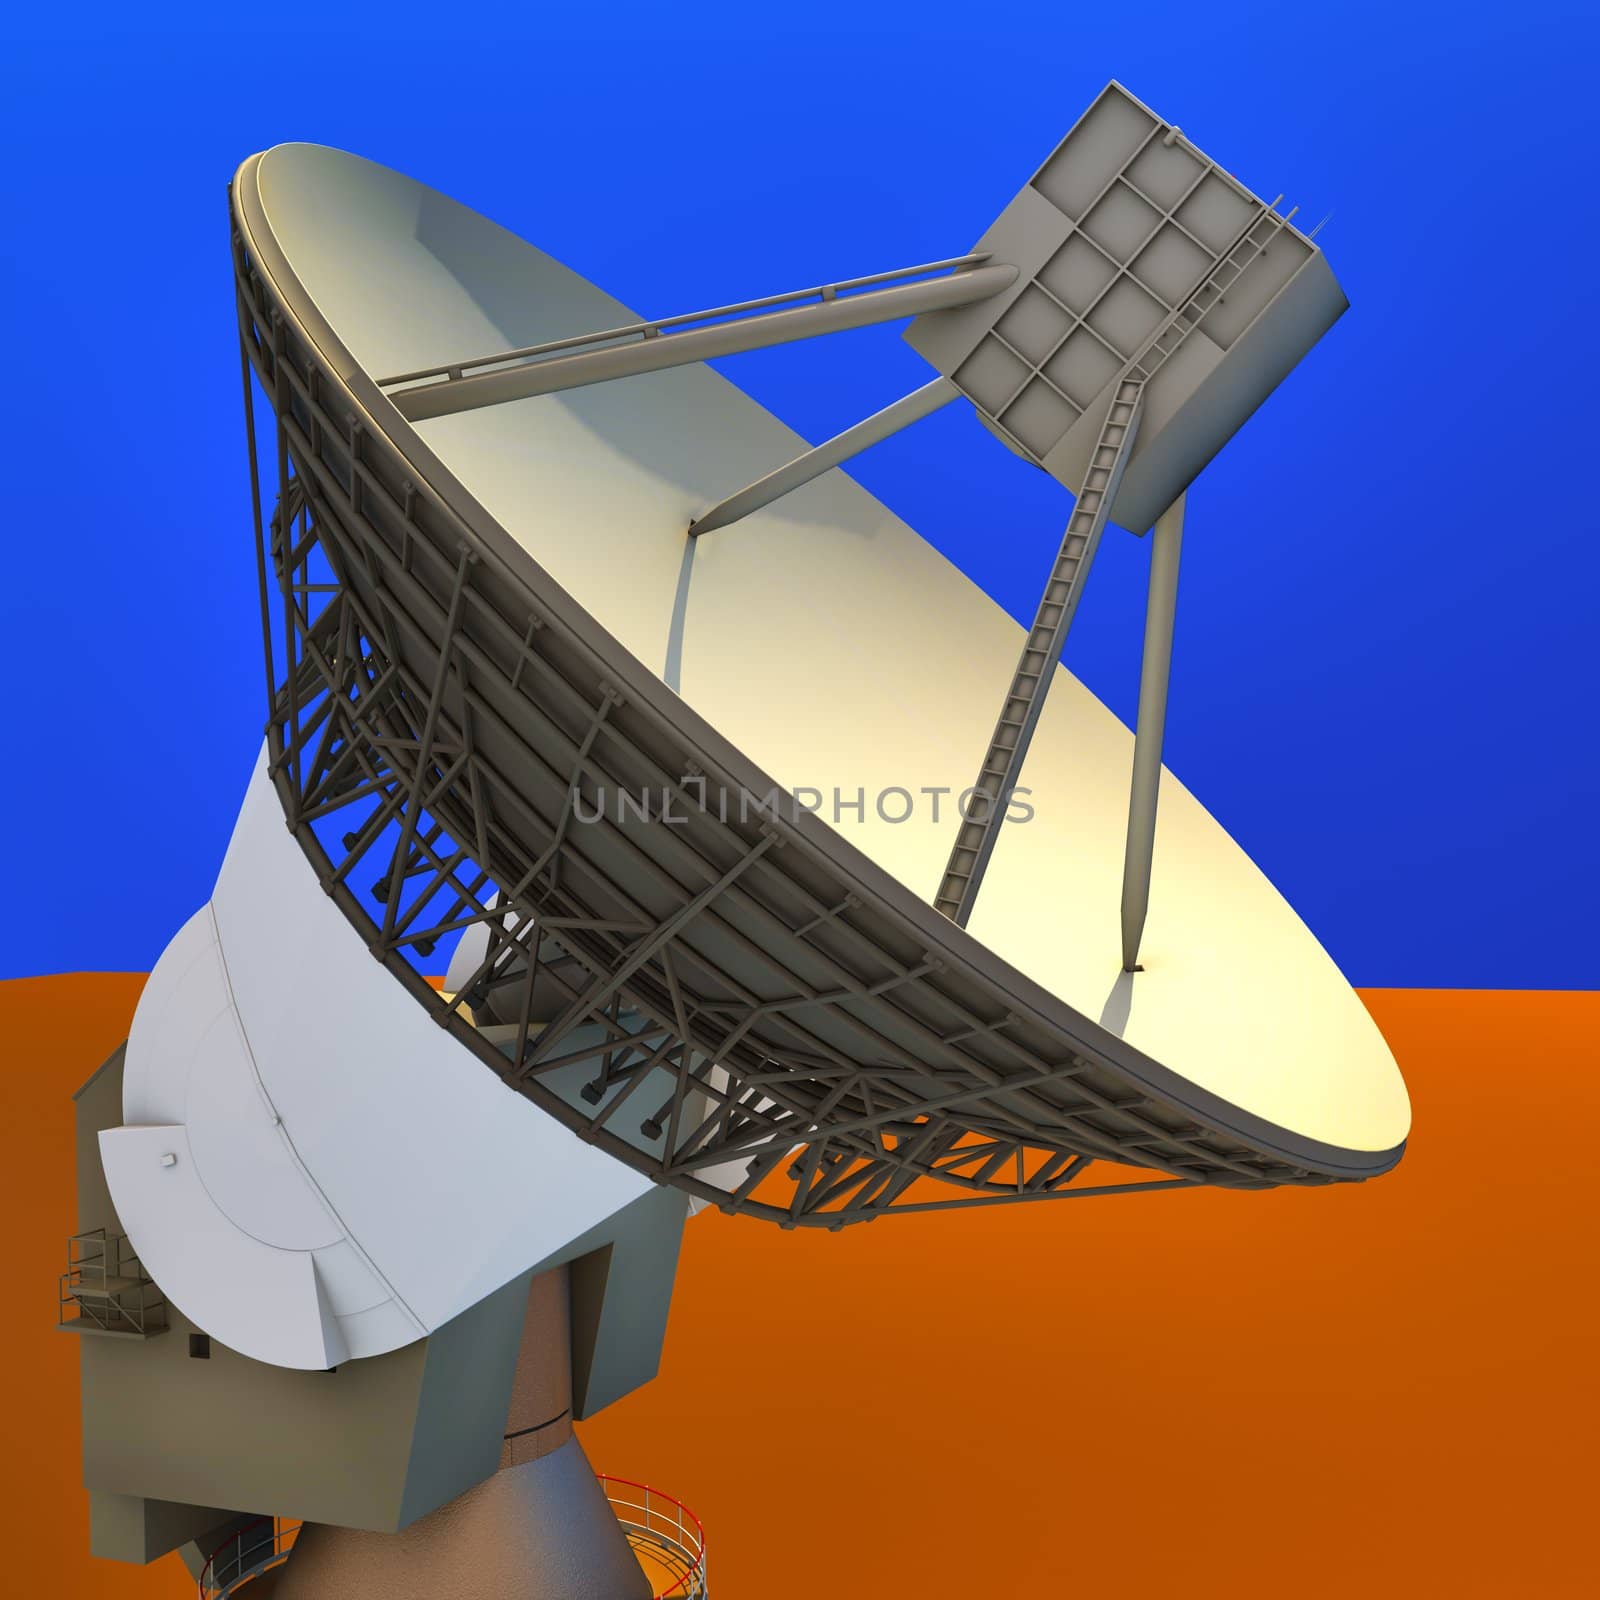 Large Array satellite dish antenna by andromeda13